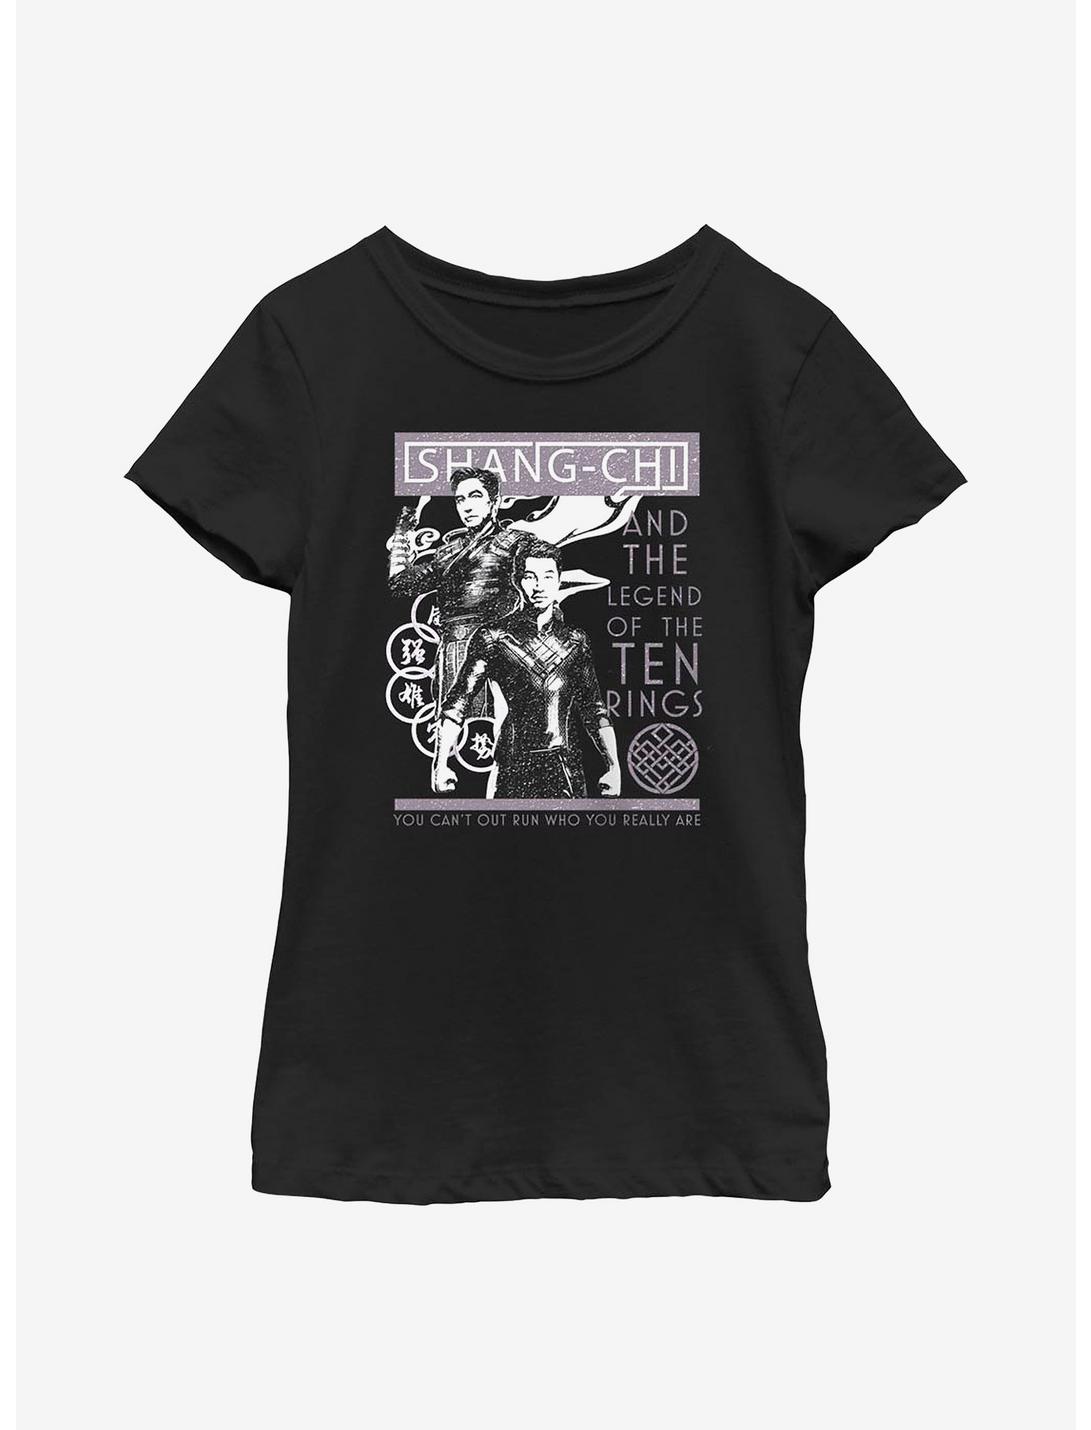 Marvel Shang-Chi And The Legend Of The Ten Rings Father Son Duo Youth Girls T-Shirt, BLACK, hi-res